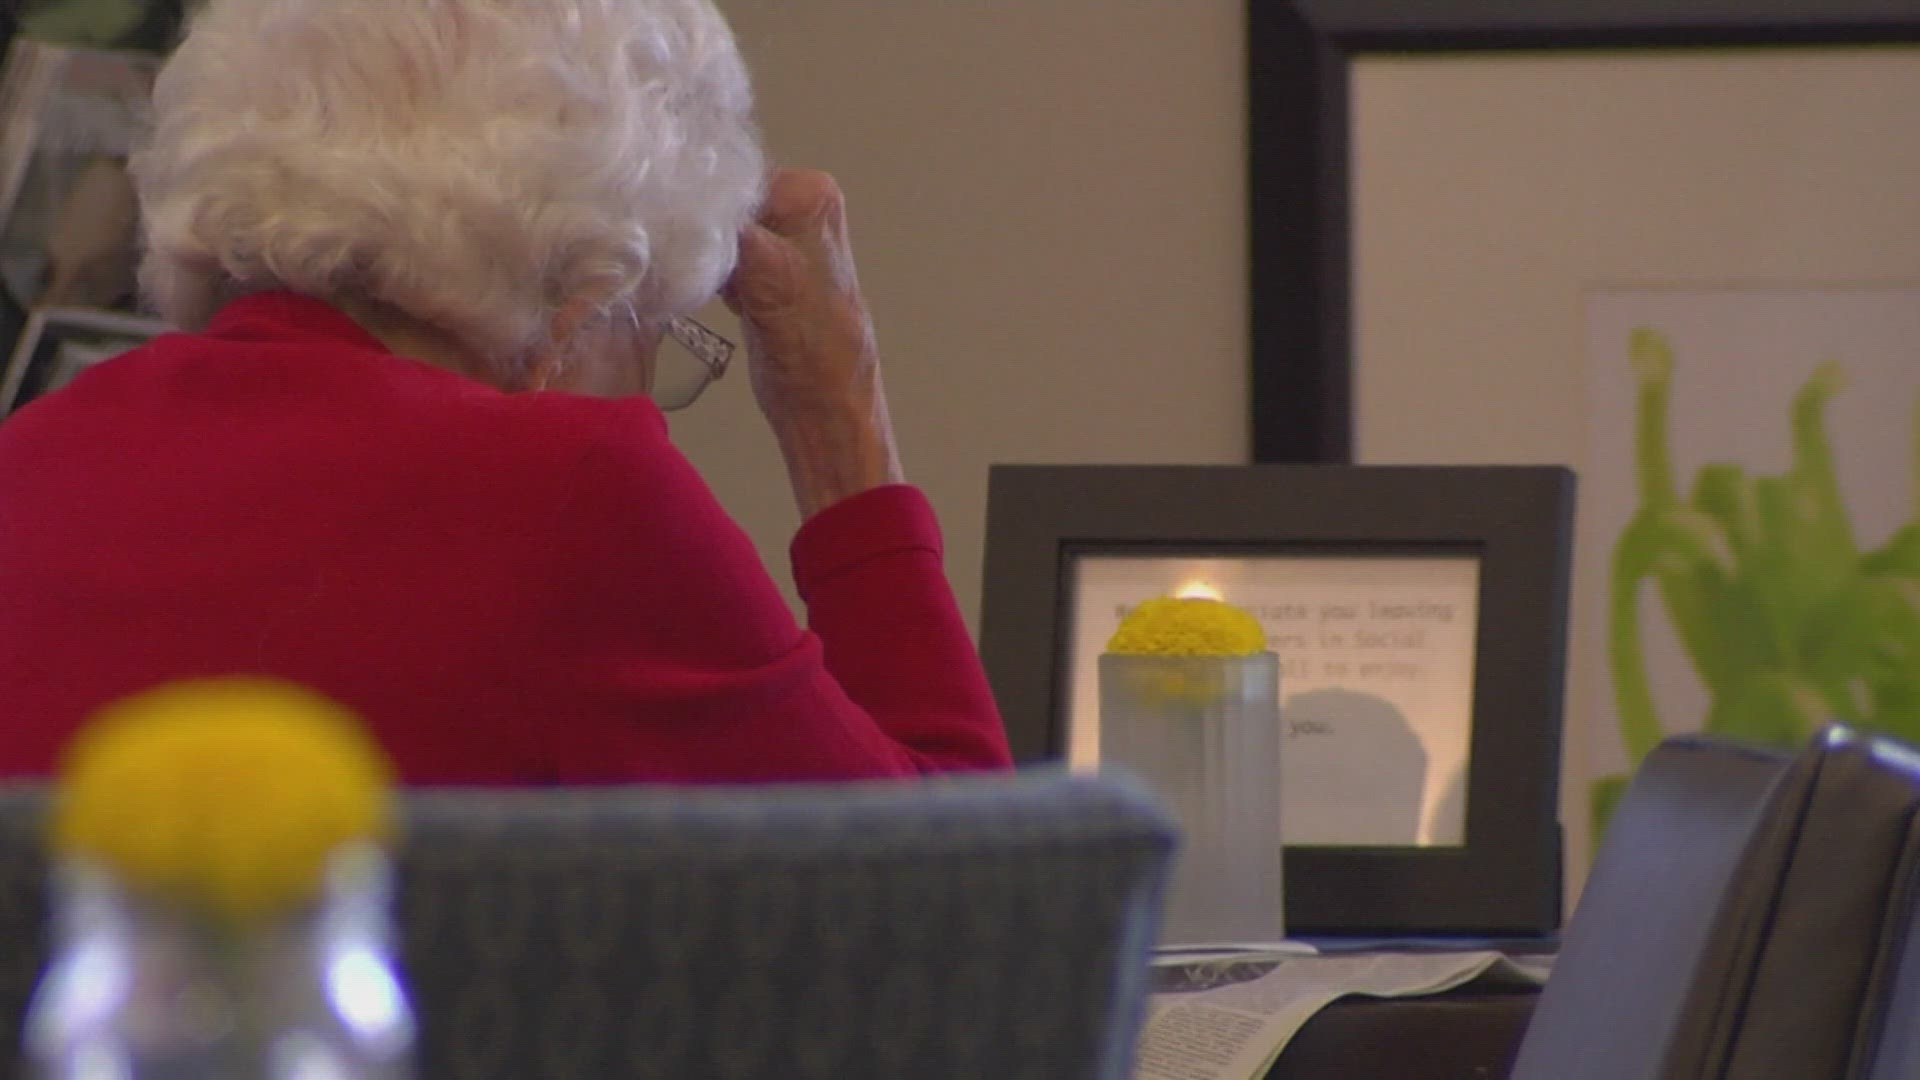 The study shows how some seniors are forced to make difficult decisions amid rising prices.